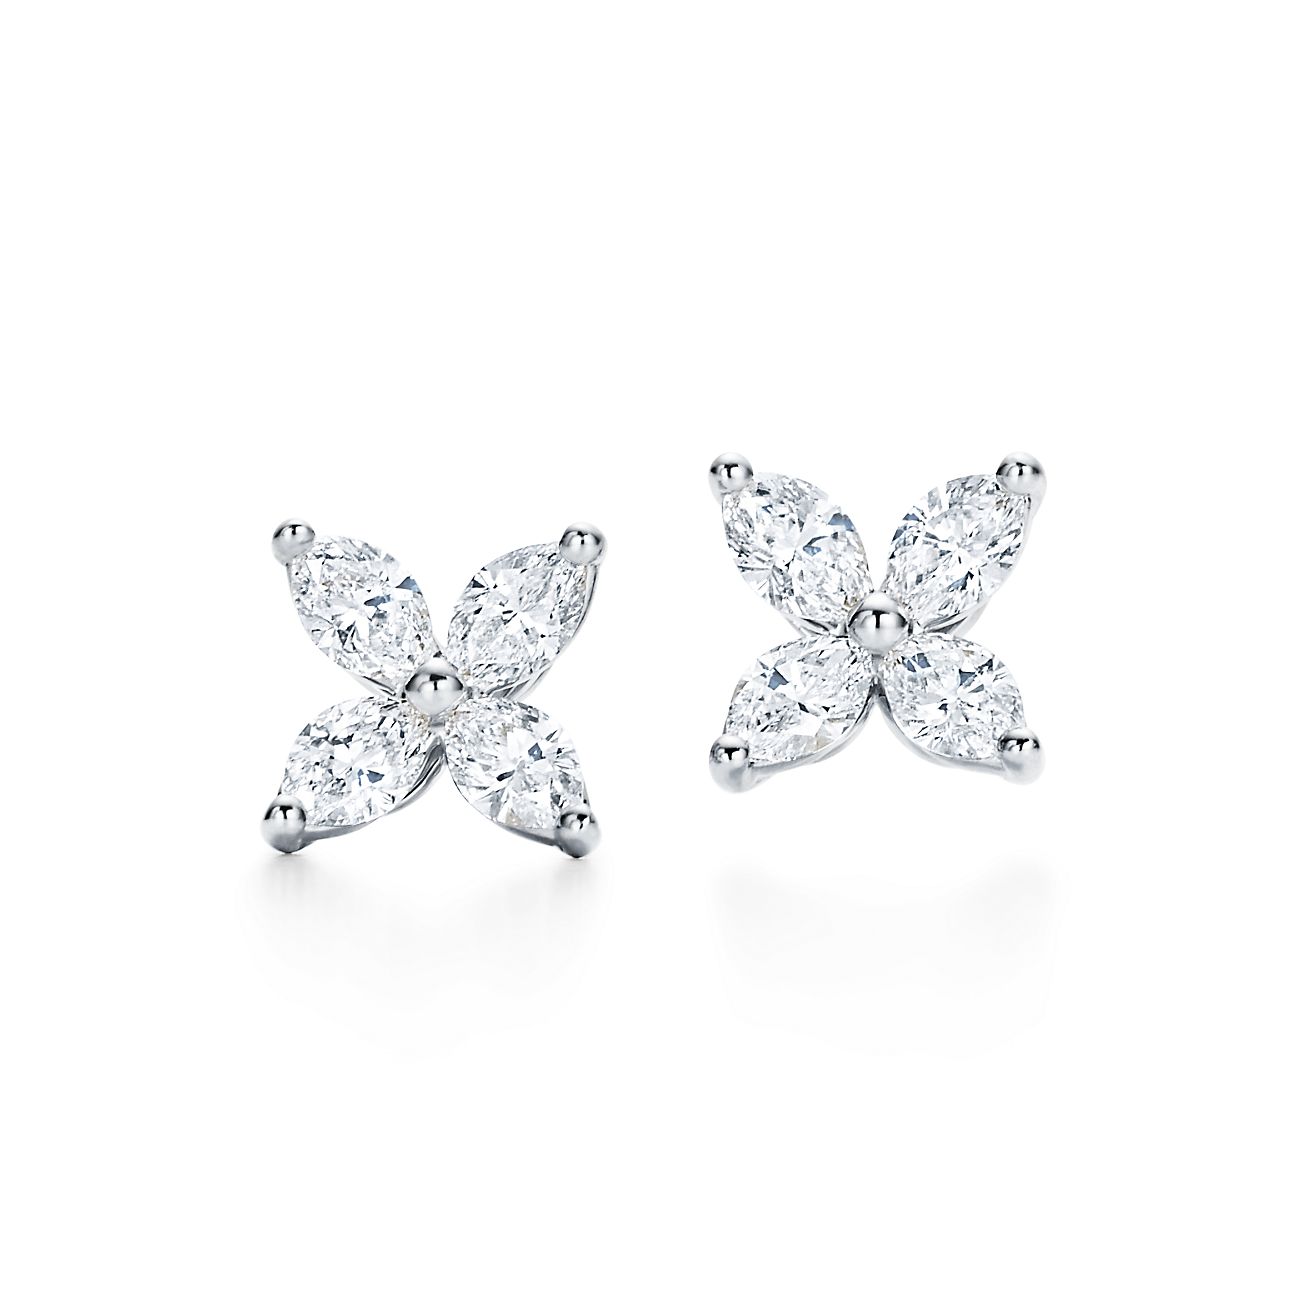 Tiffany Victoria® earrings in platinum with diamonds, small. | Tiffany & Co.